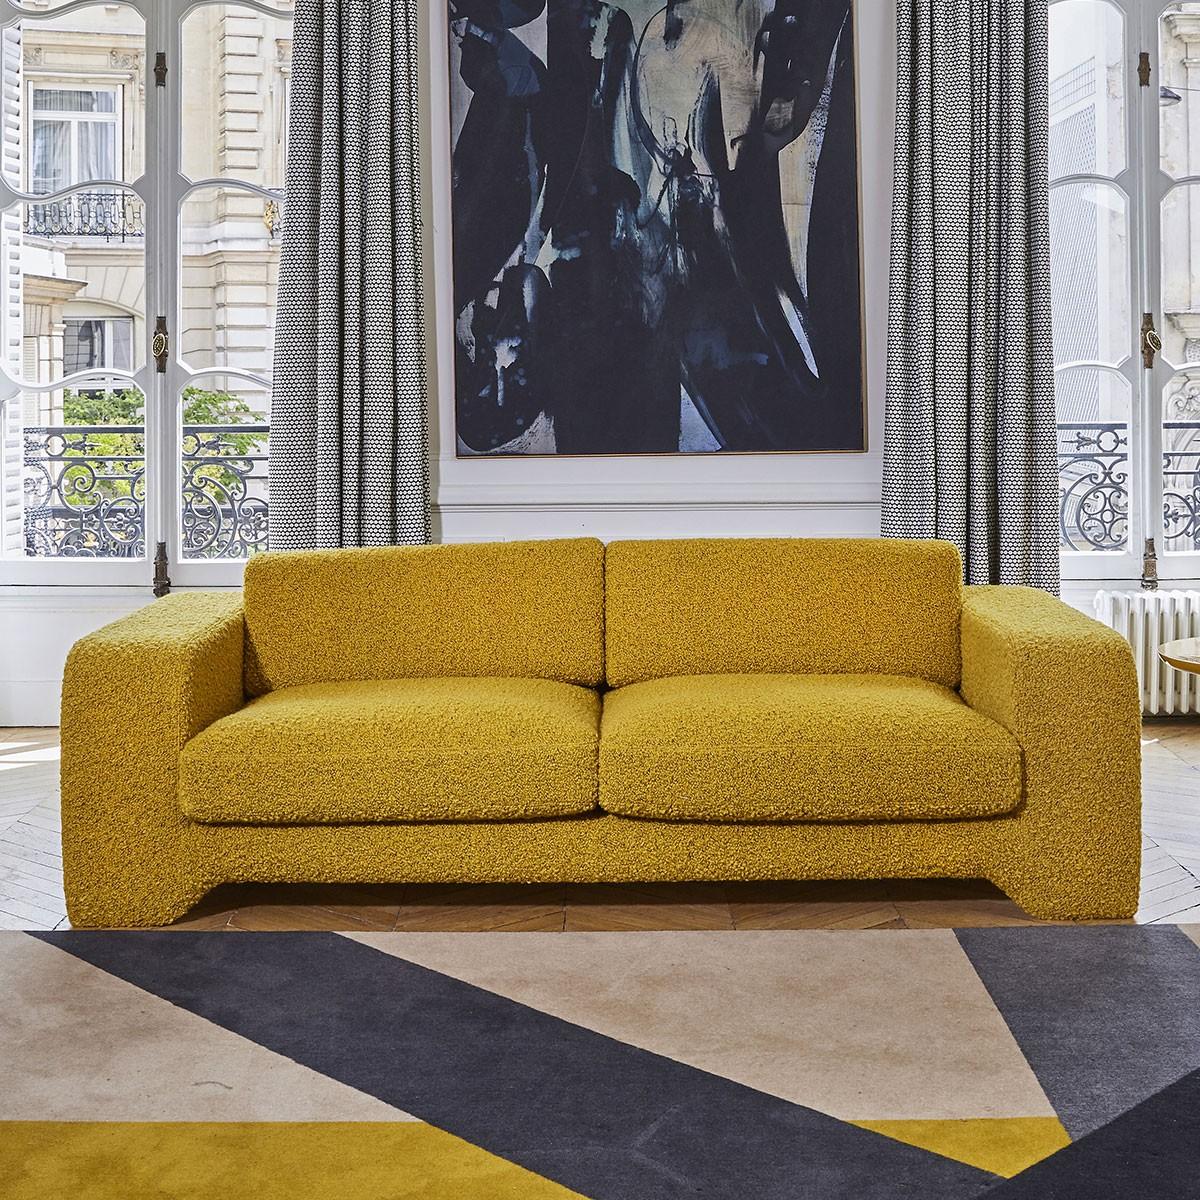 Popus Editions Giovanna 2.5 seater sofa in amber como velvet upholstery

Giovanna is a sofa with a strong profile. A sober, plush line, with this famous detail that changes everything, so as not to forget its strength of character and this